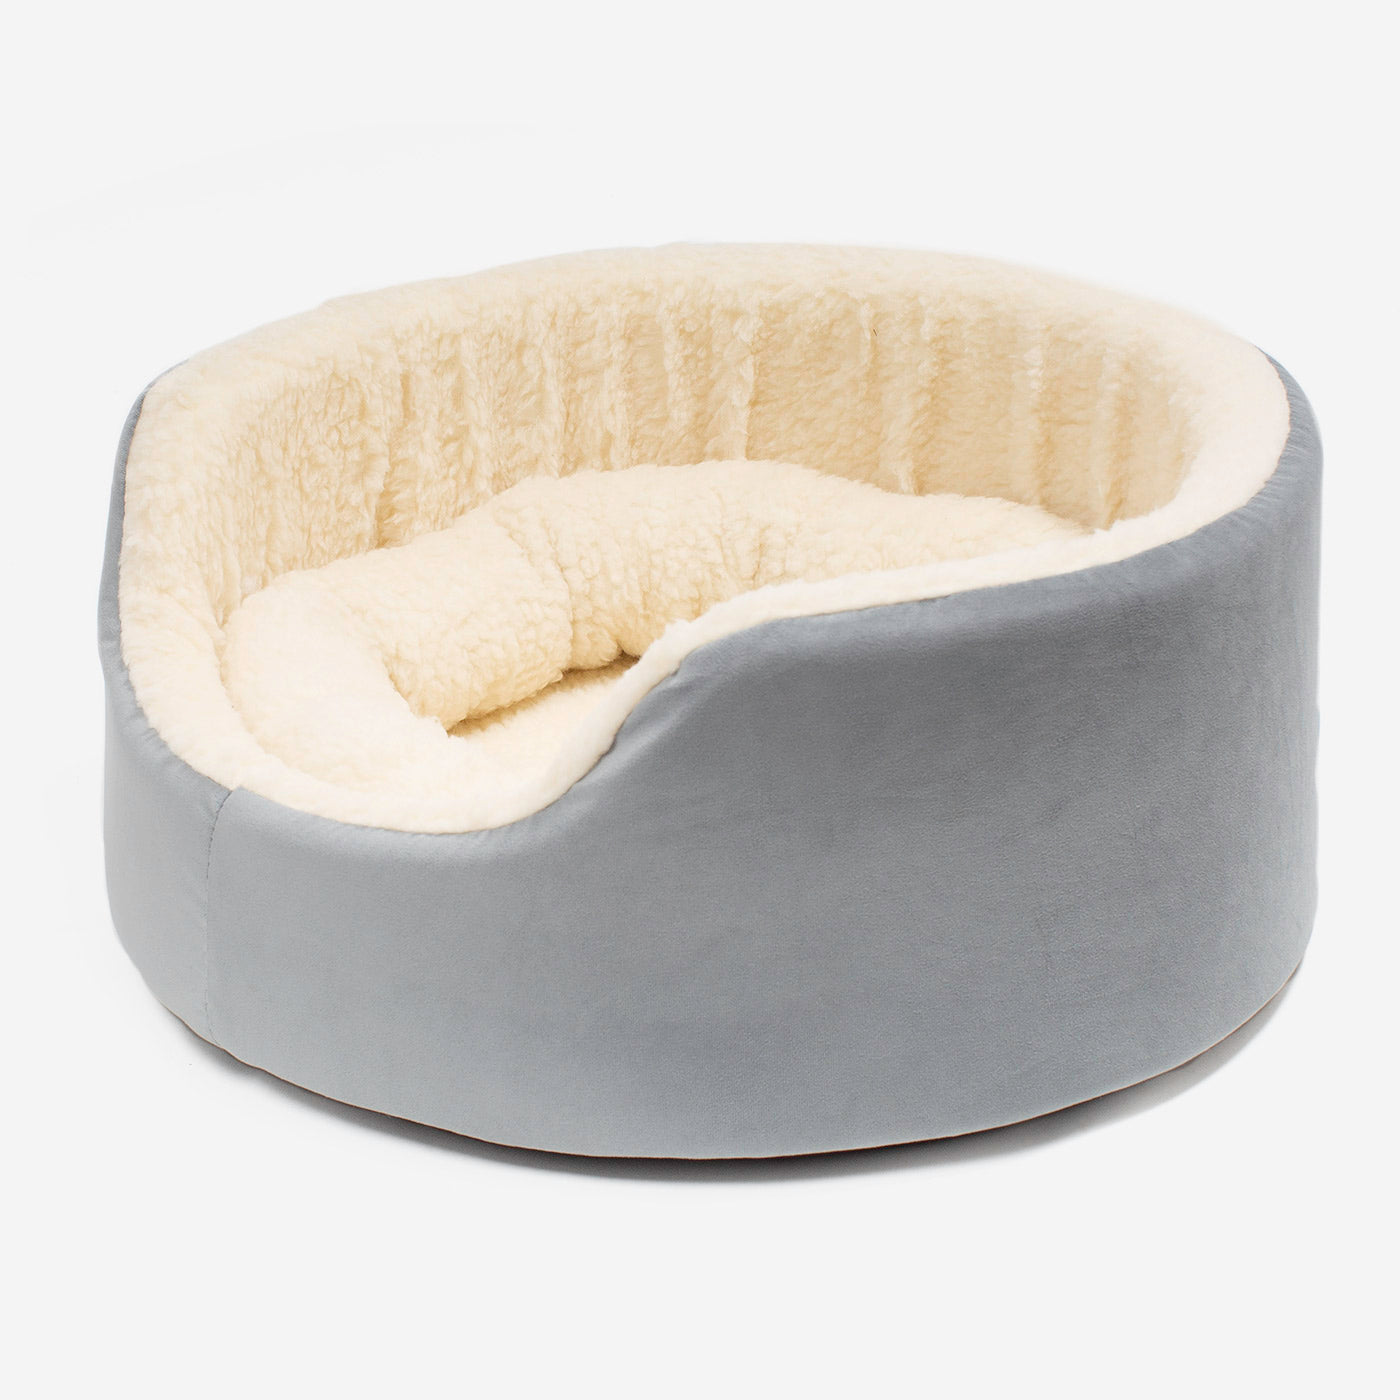 Discover our luxurious dog bed perfect for puppy growing! Crafted from plush sherpa, faux suede outer and complete with soft foam inner to present the ideal dog bed for puppies to grow! Available now at Lords & Labradors US